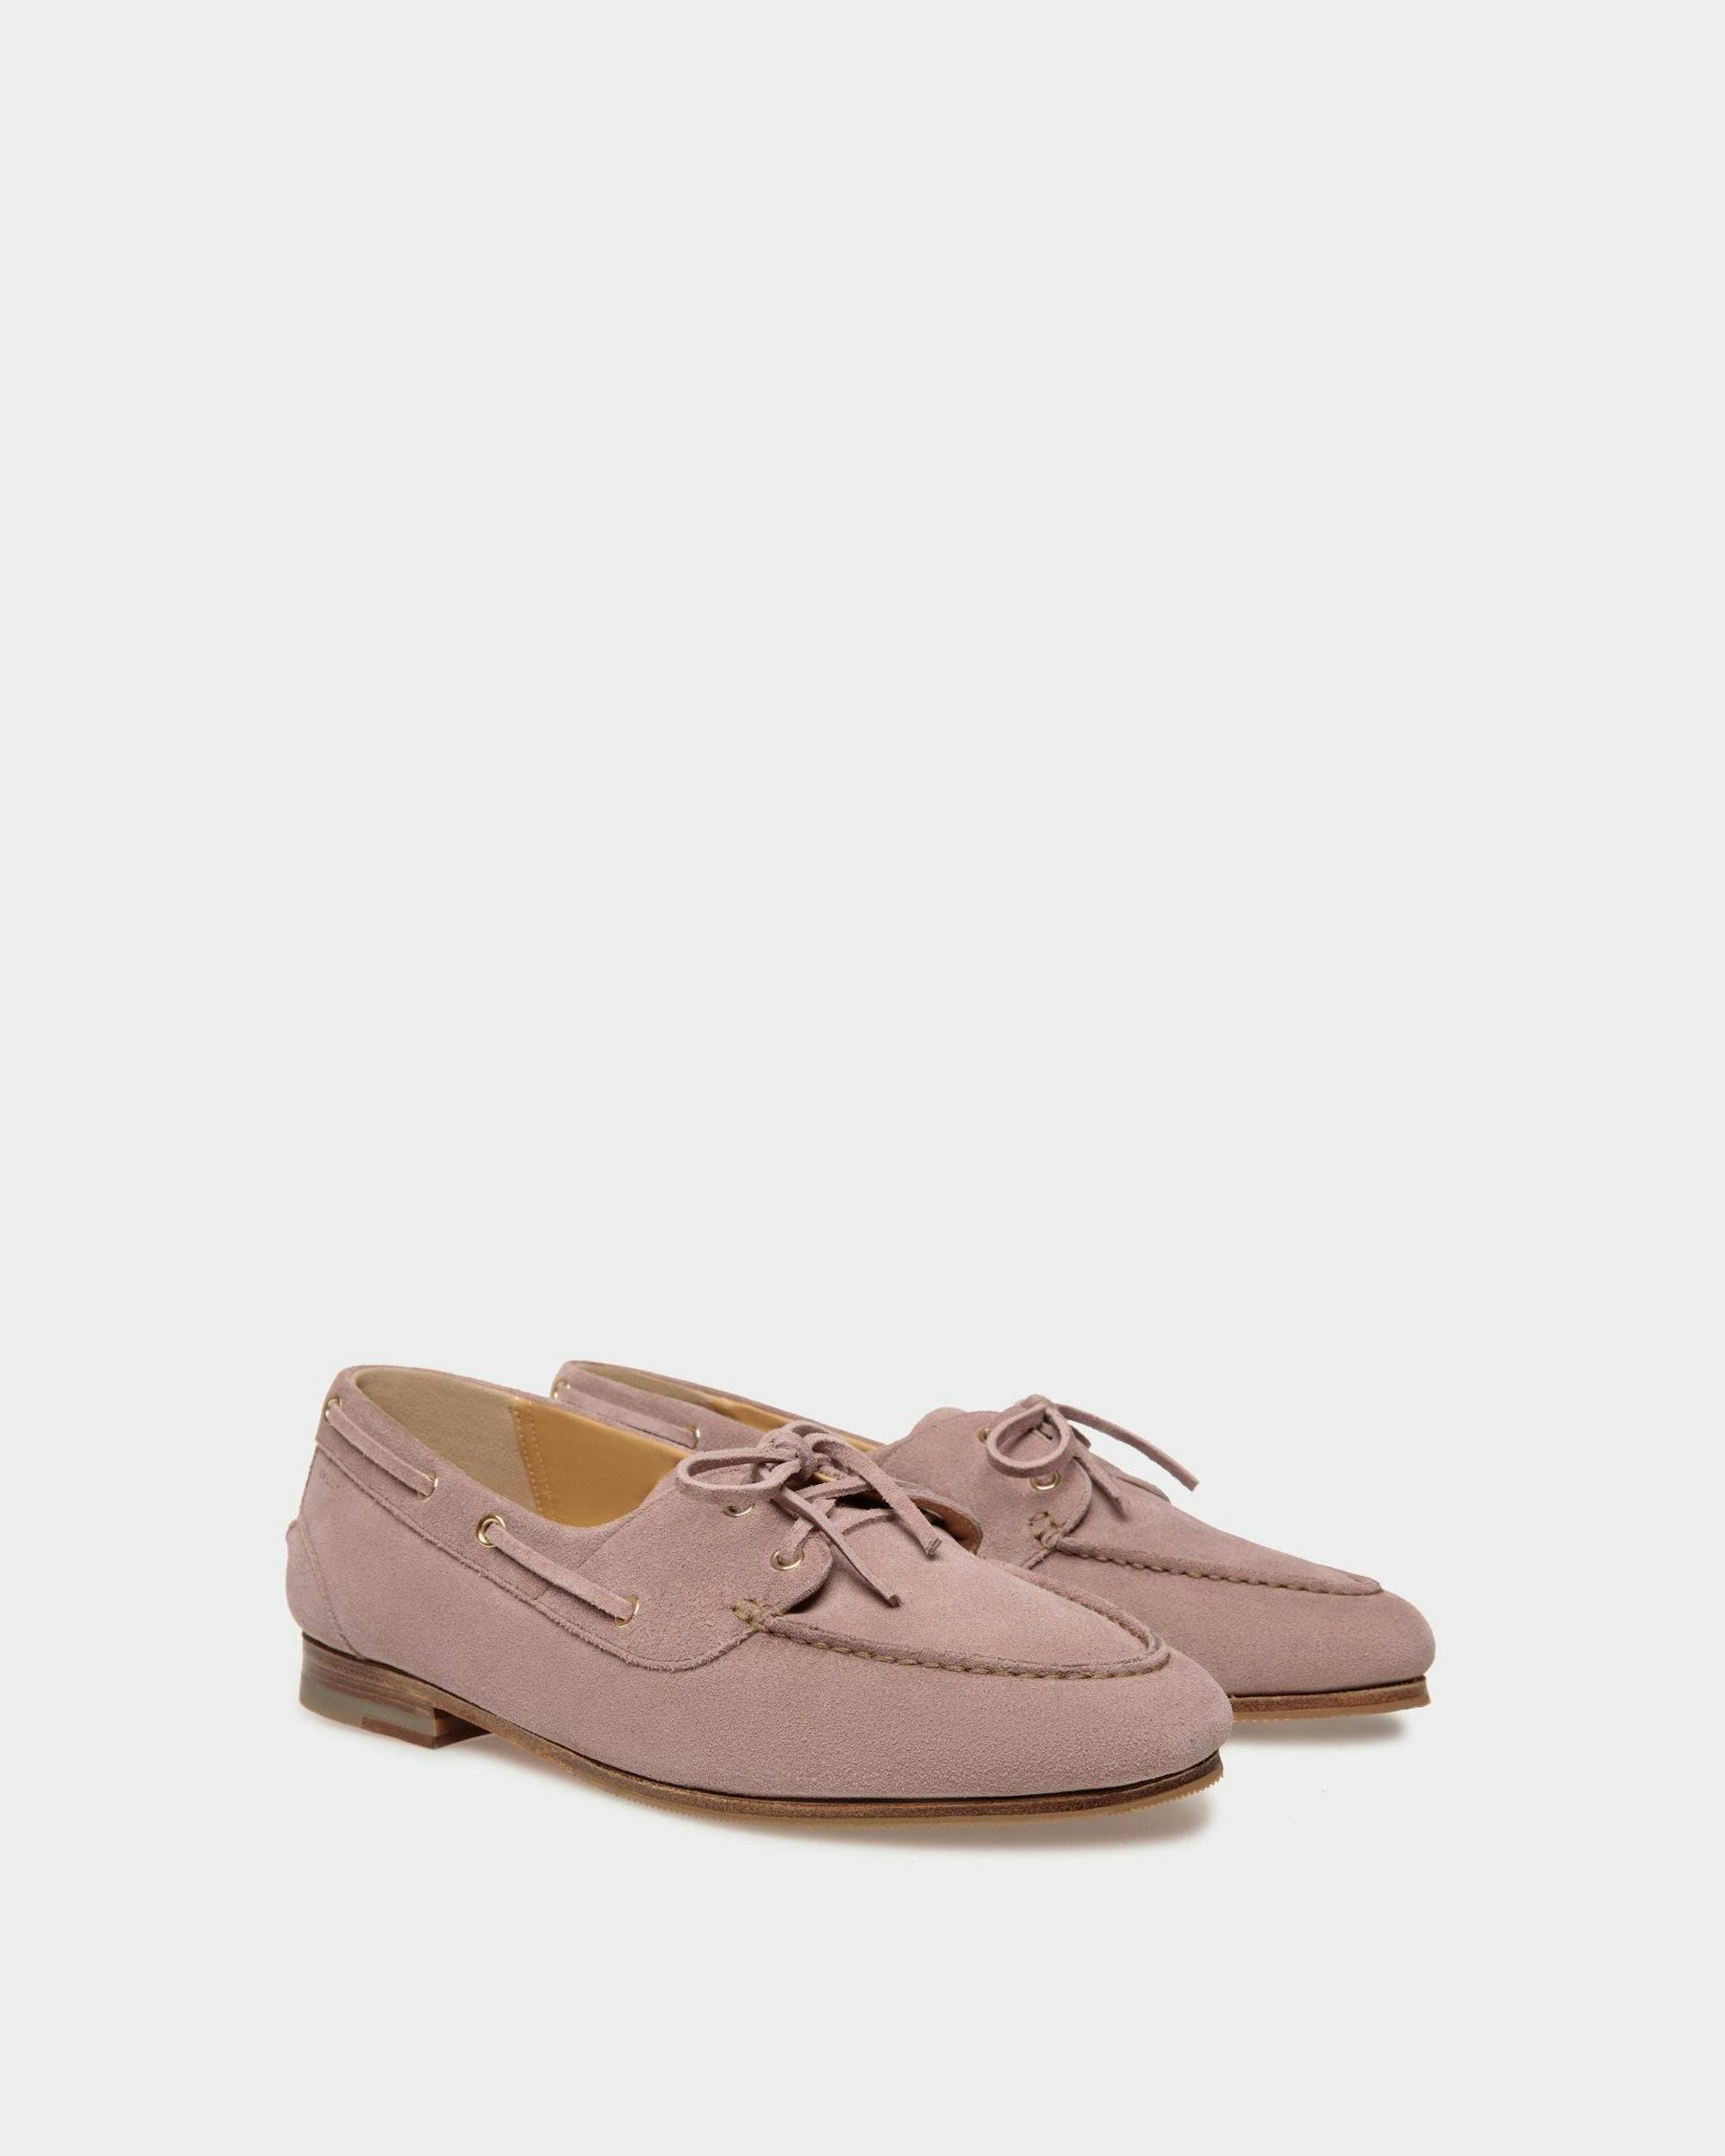 Men's Plume Moccasin in Light Mauve Suede | Bally | Still Life 3/4 Front